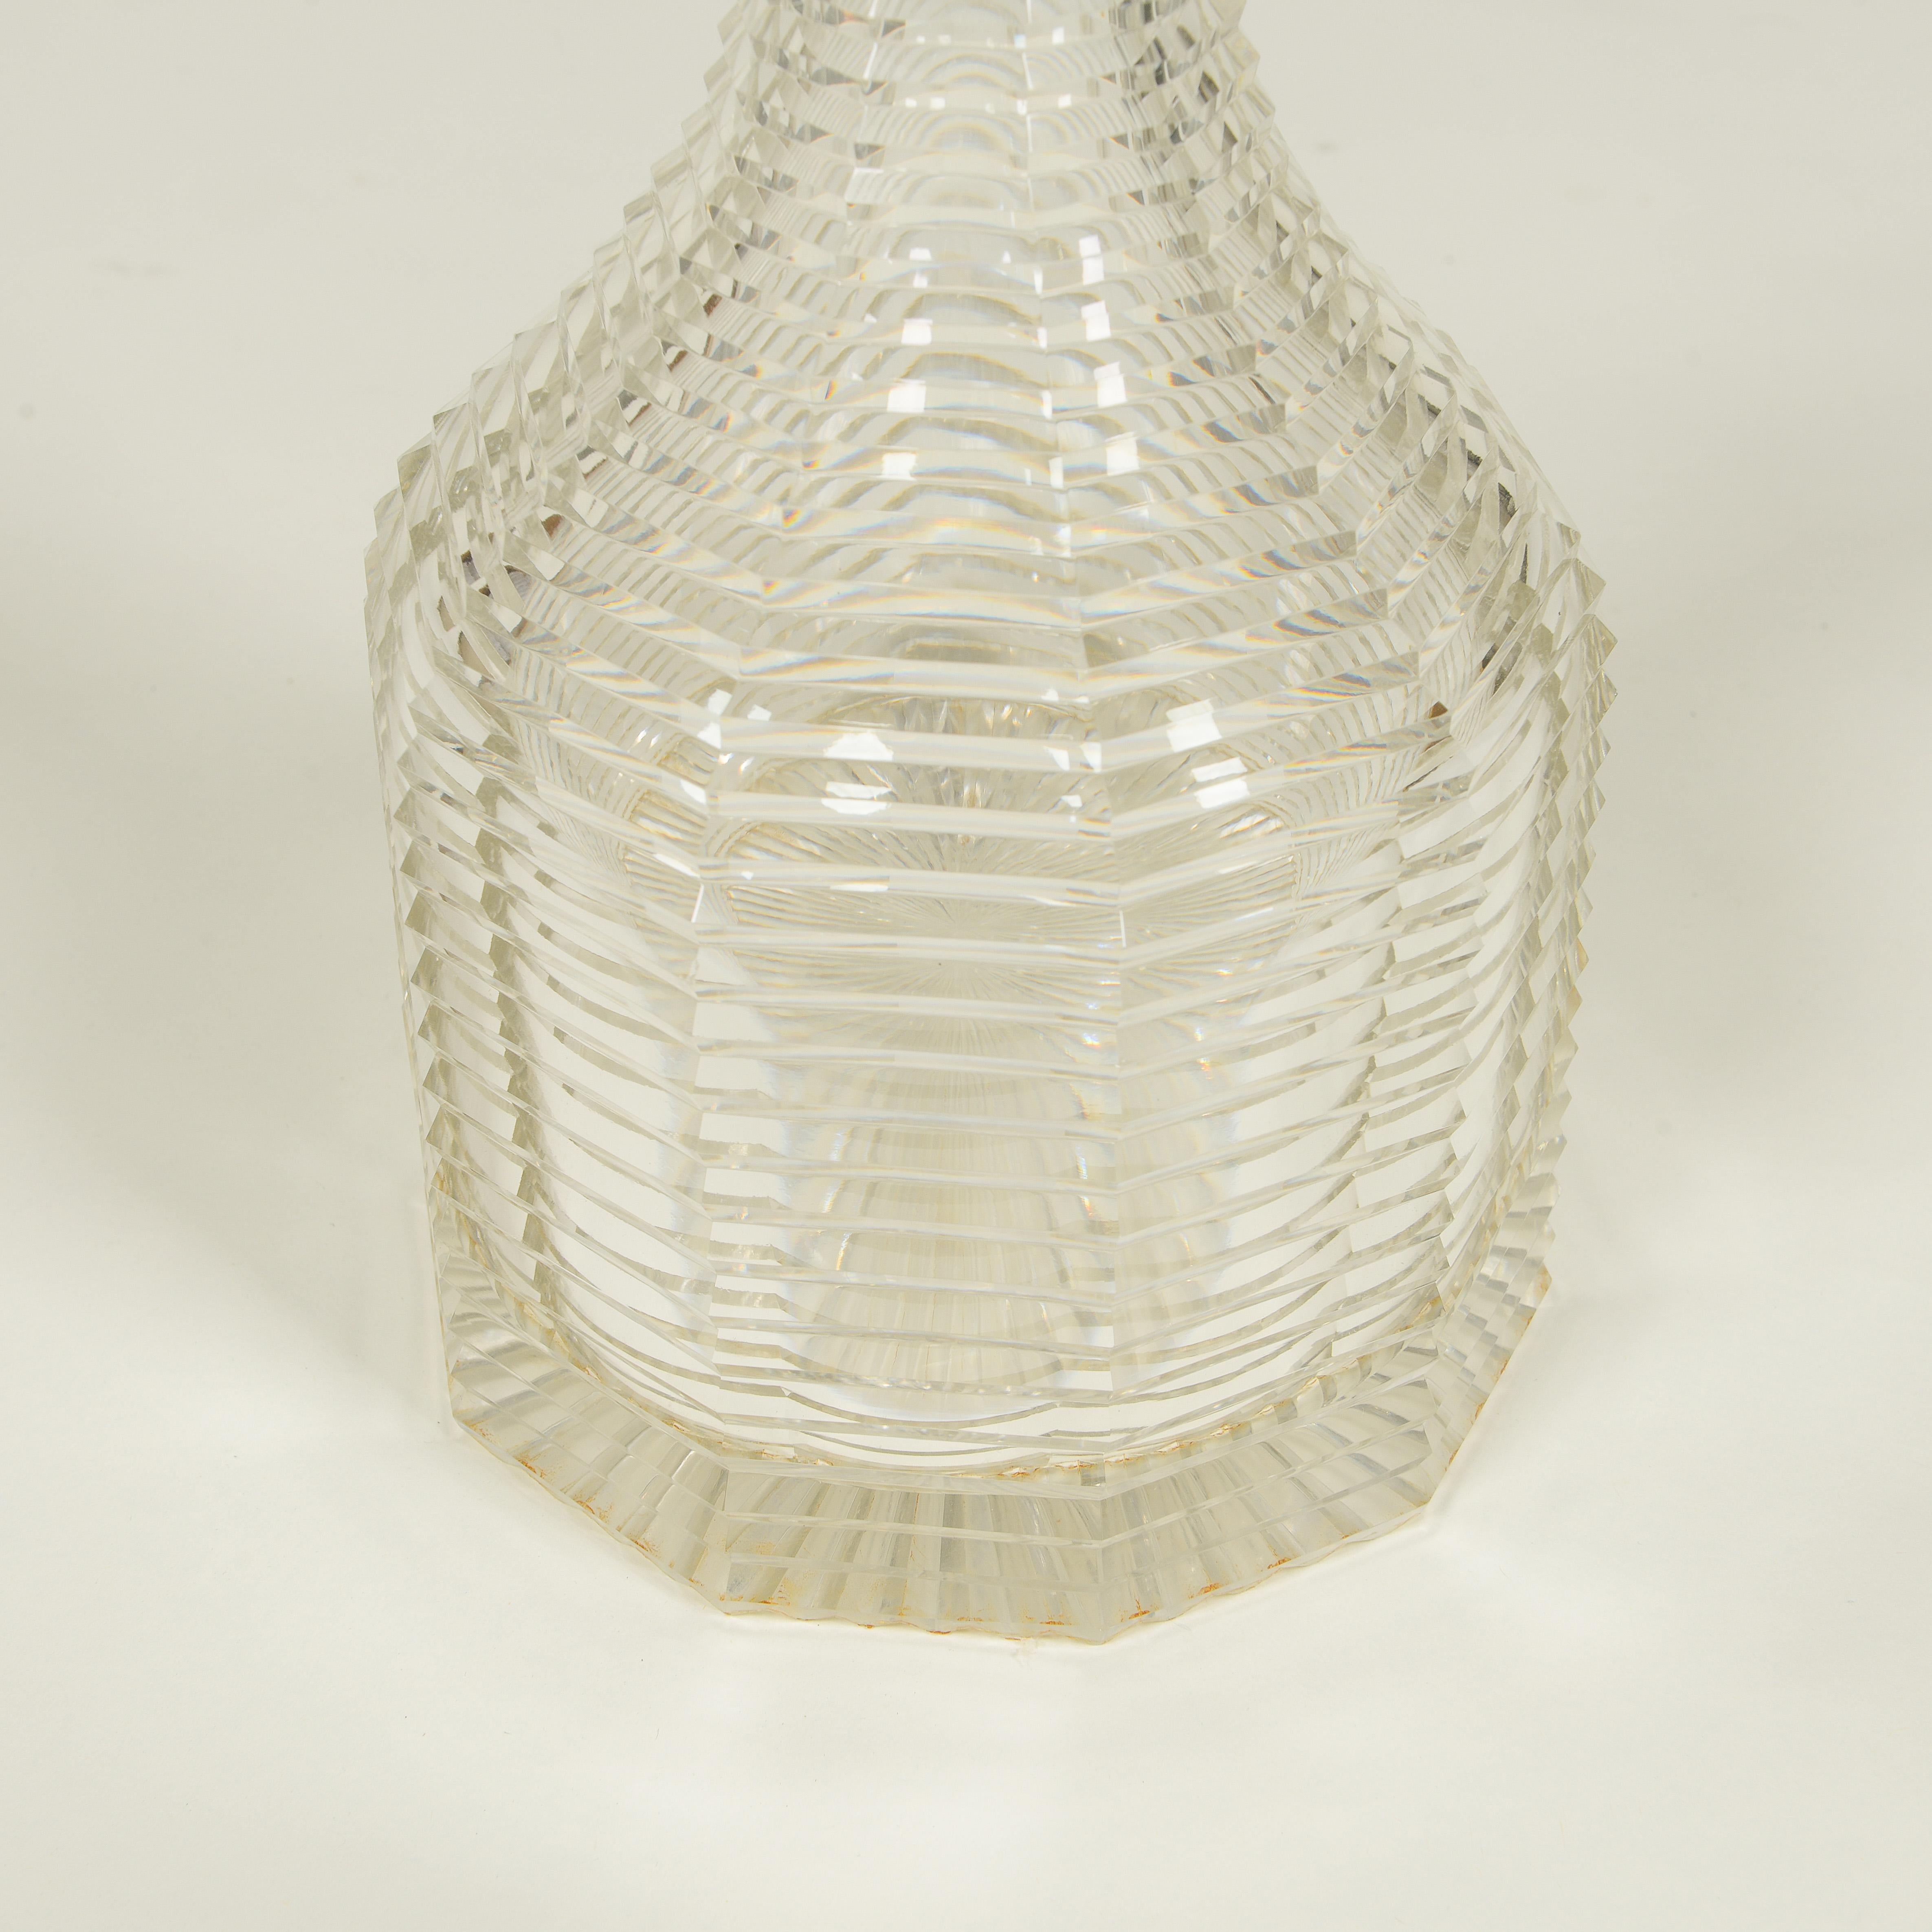 English Cut Crystal Decanter For Sale 2